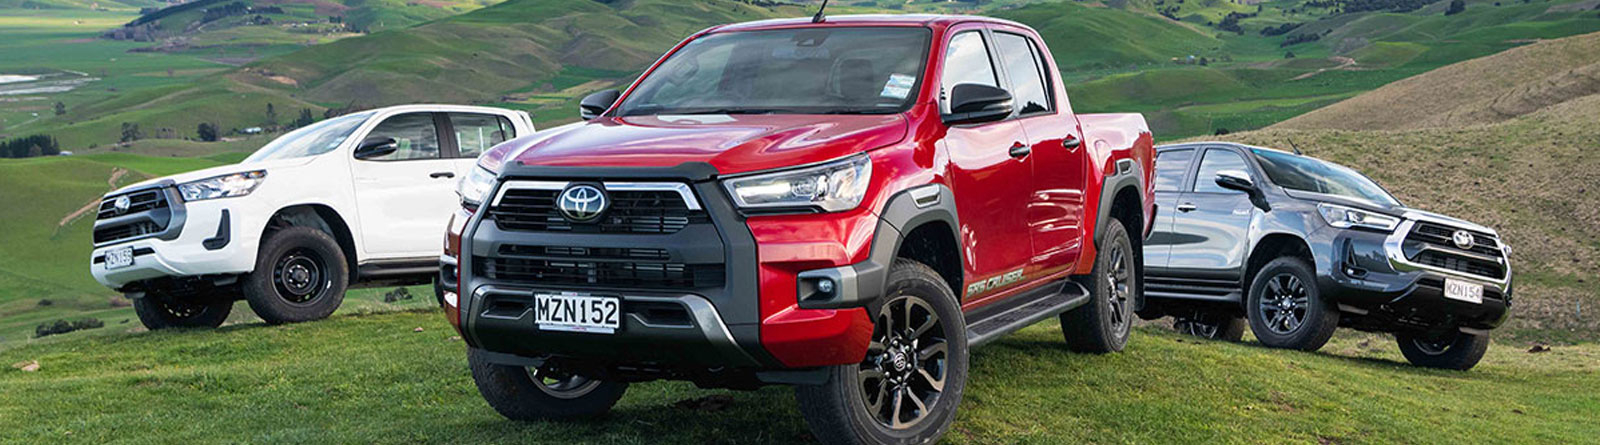 Accessories for Toyota Hilux Extra Cab 2021